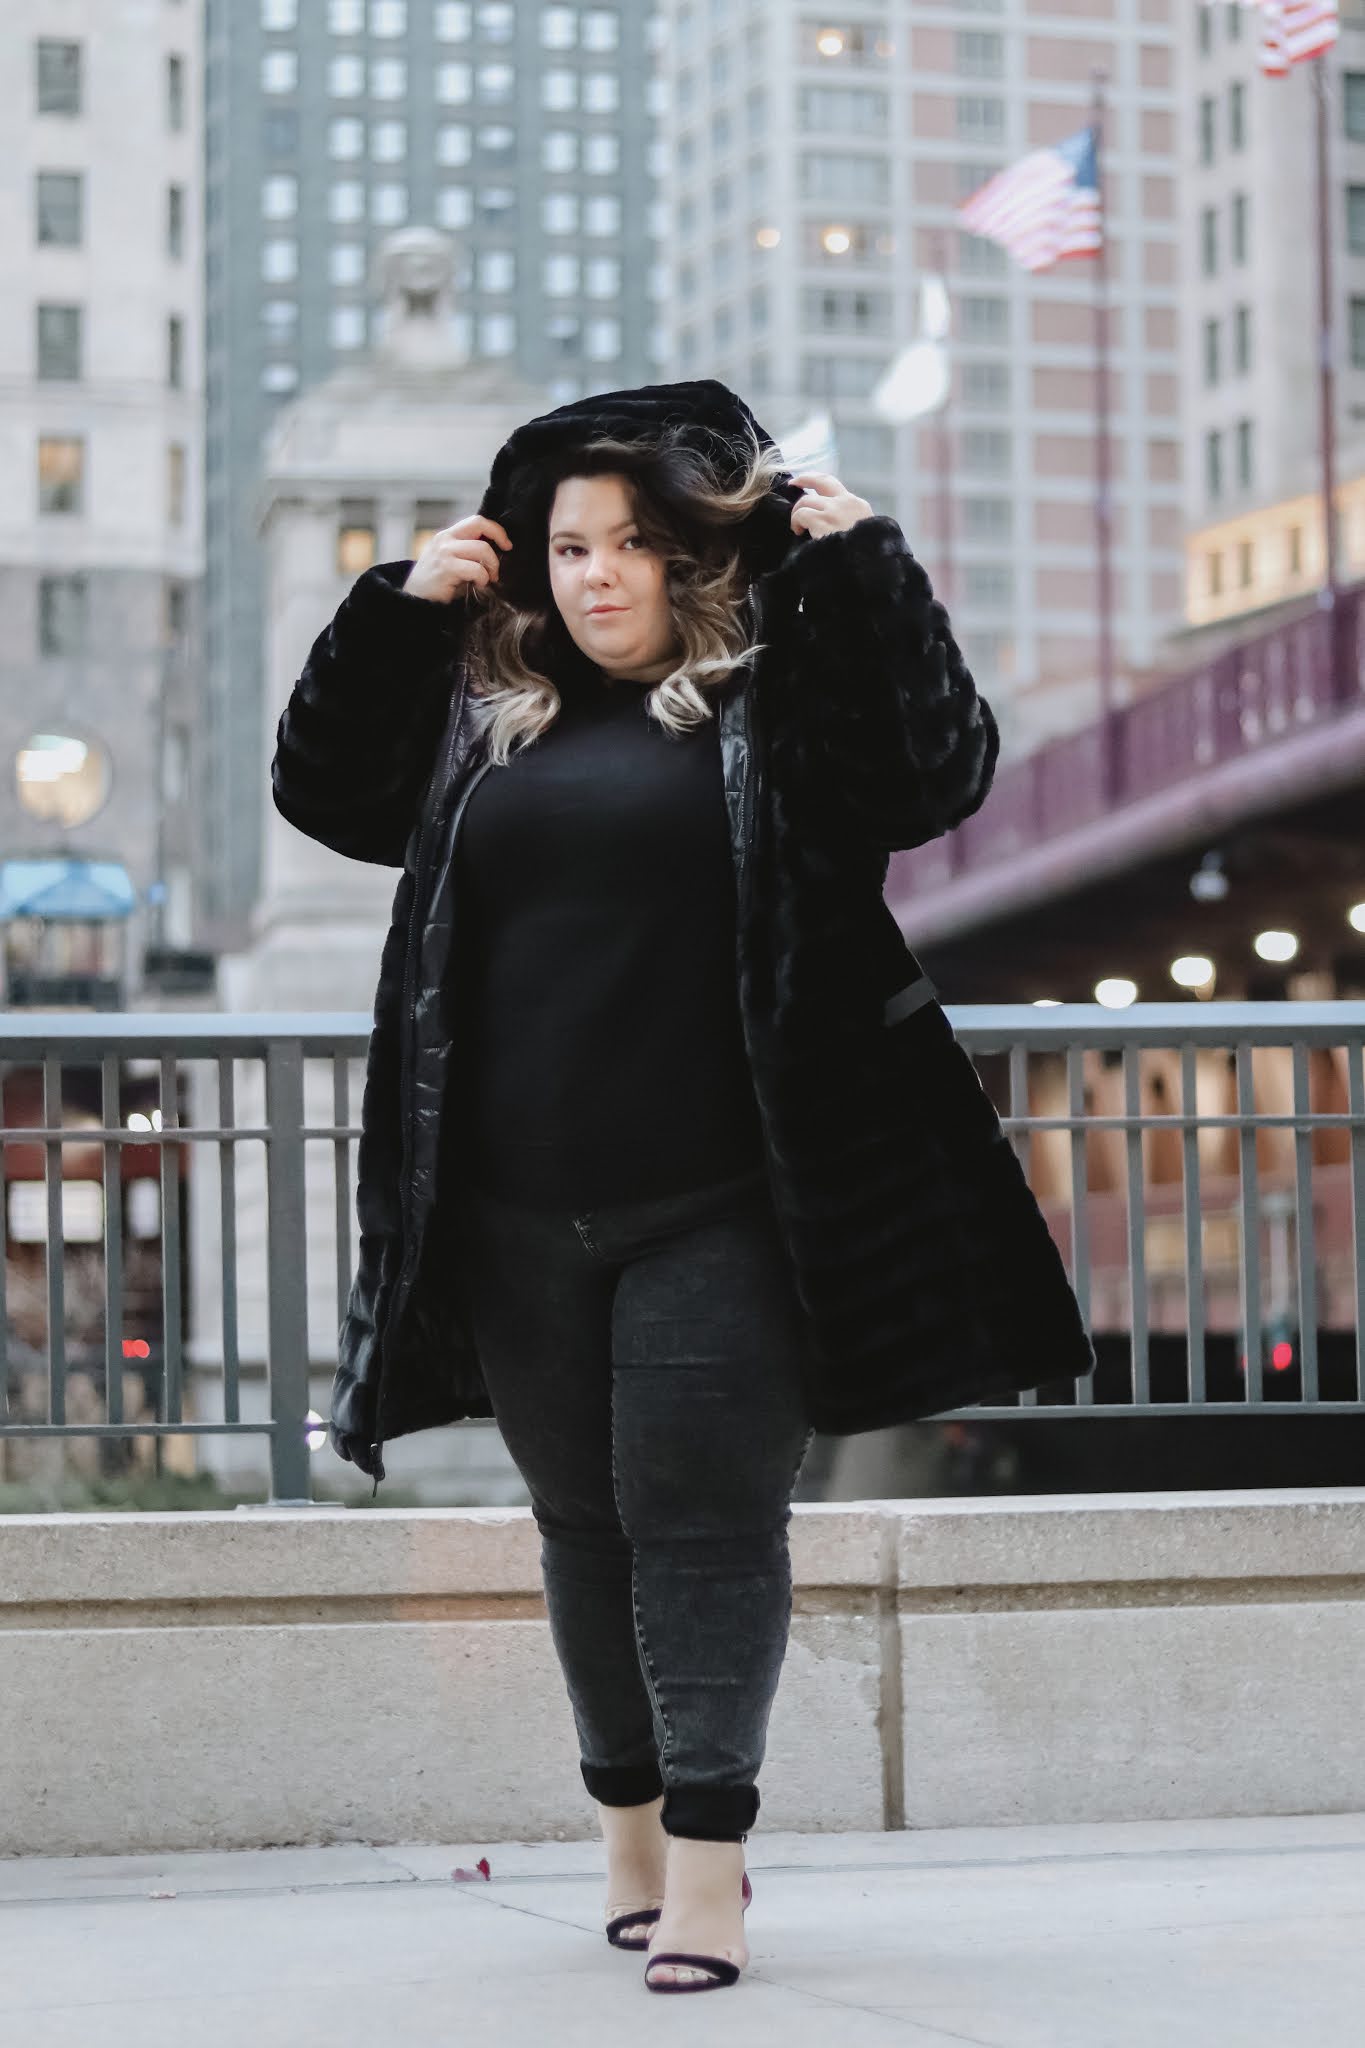 Chicago Plus Size Petite Fashion Blogger Natalie in the City high waist skinny jeans faux fur coat puffer coat fall outfits